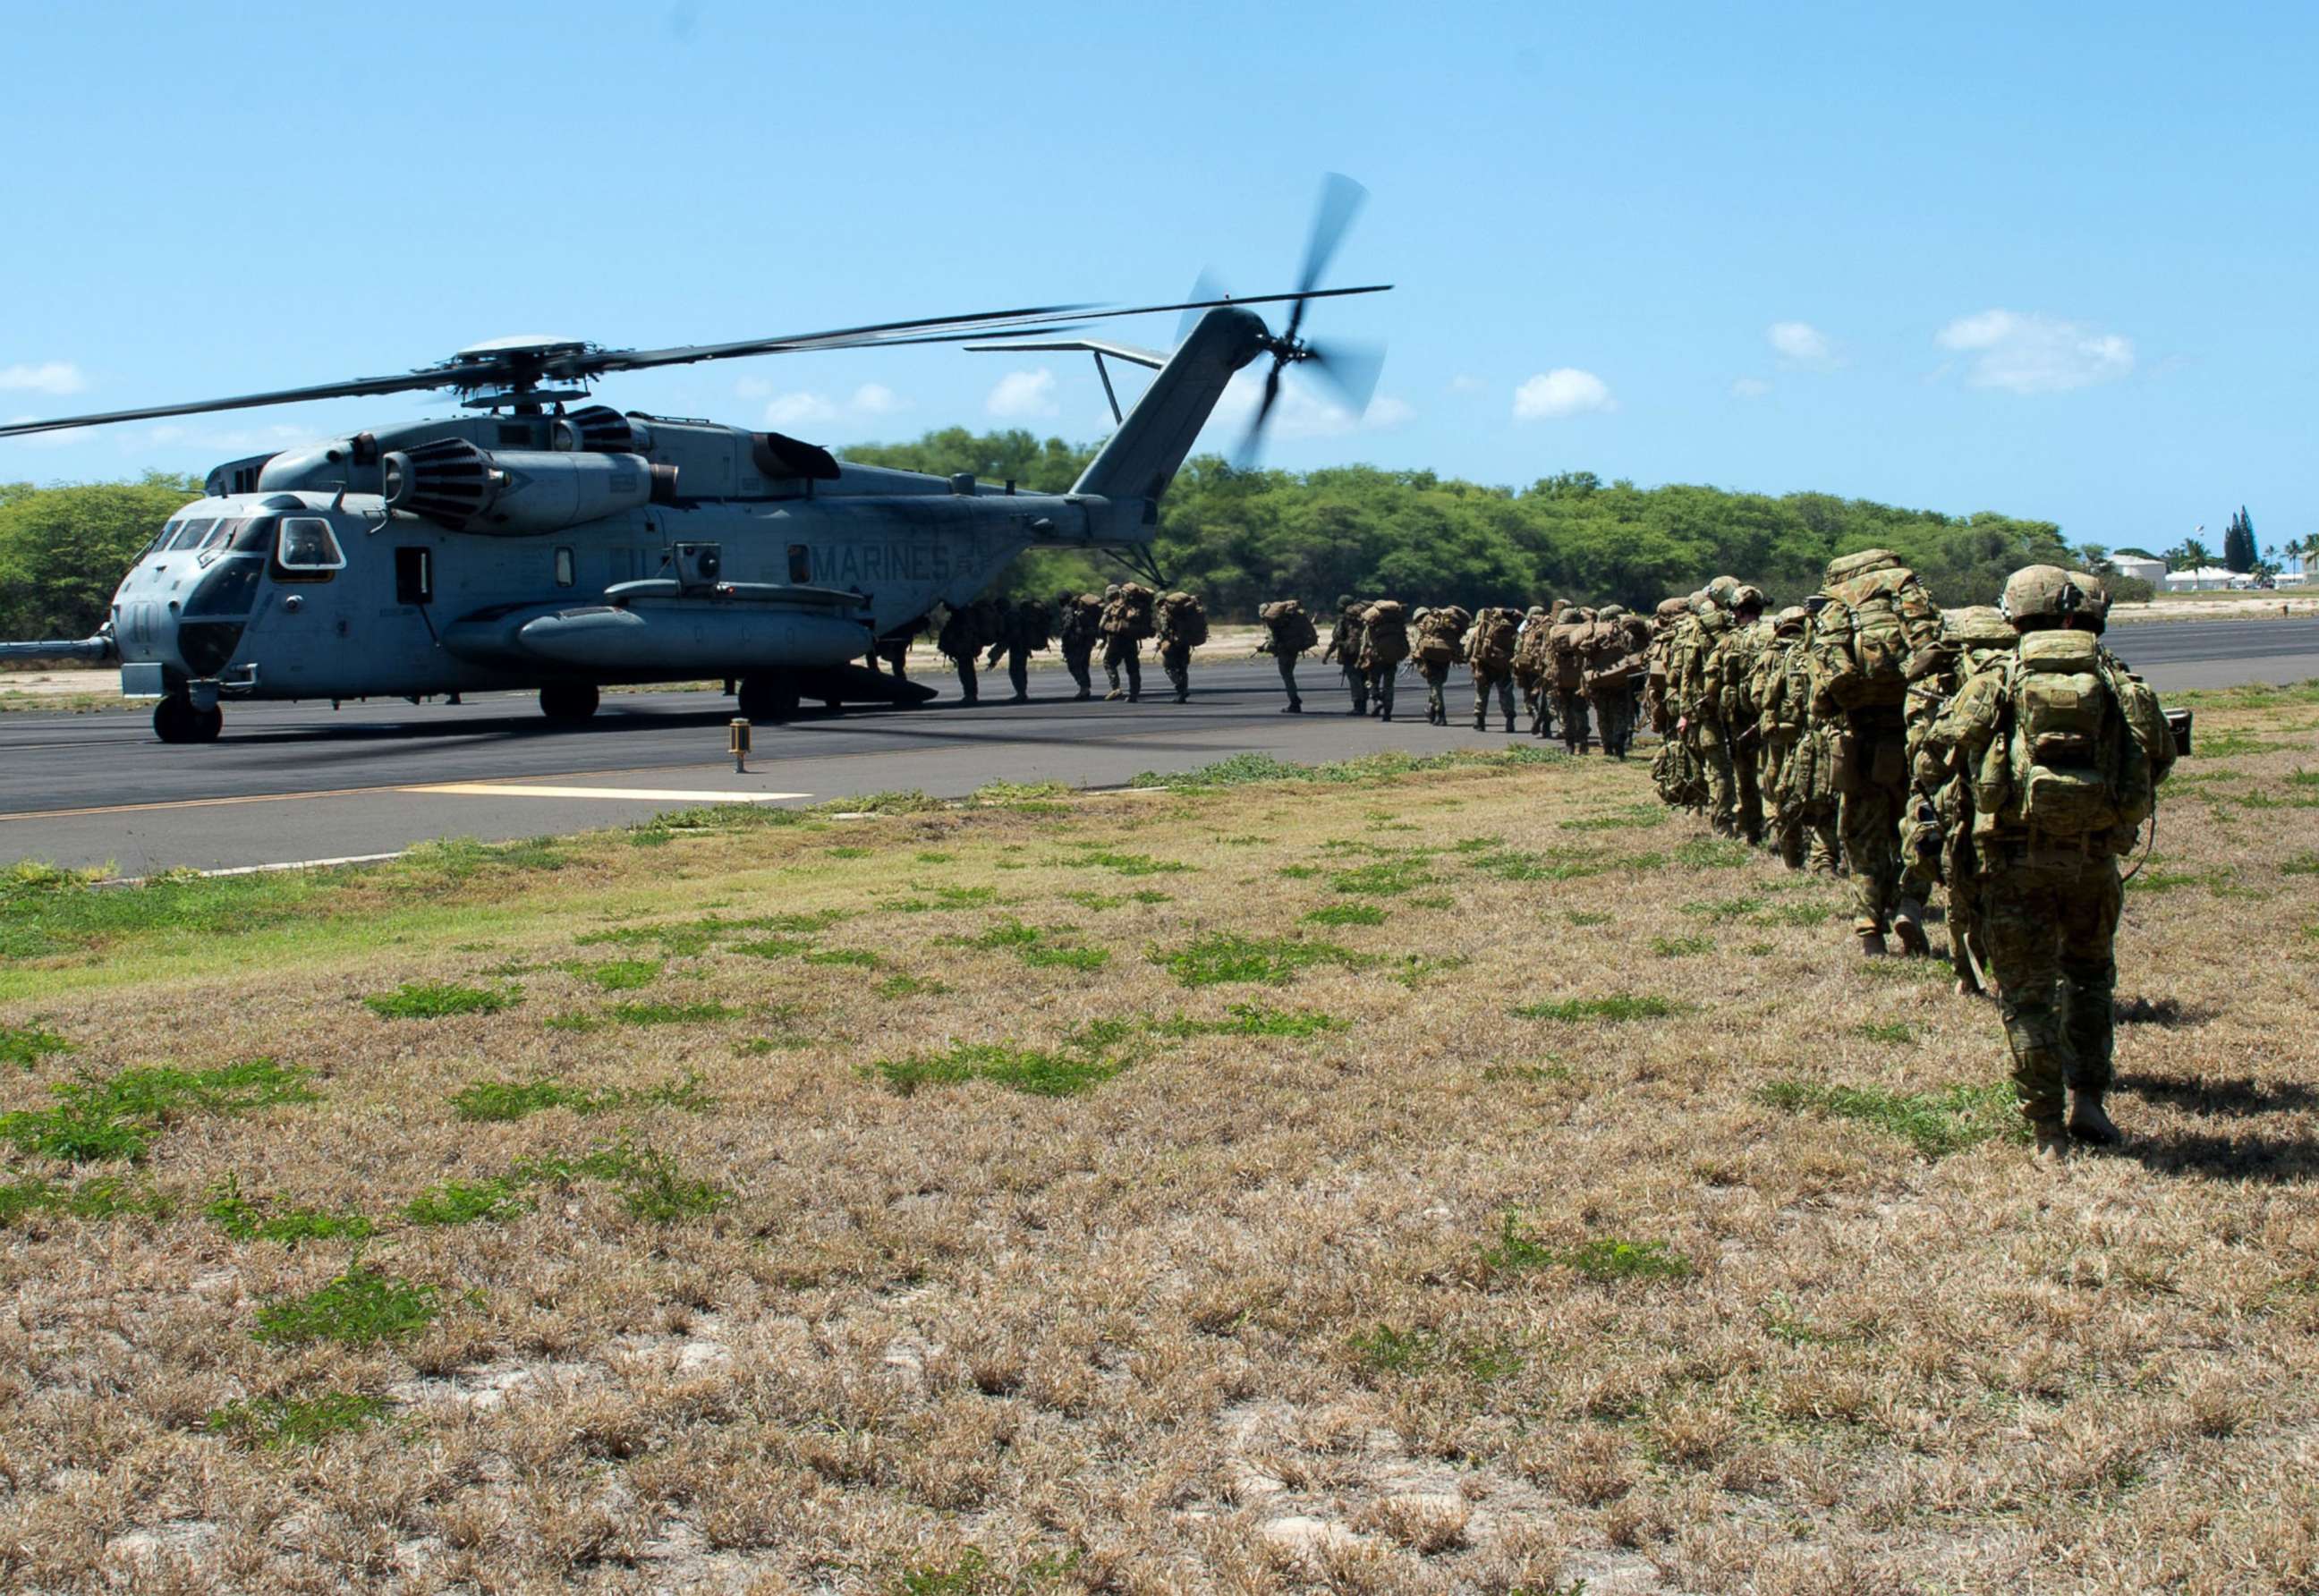 PHOTO: Marines board a CH-53 helicopter onto Pacific Missile Range Facility in Barking Sands, Hawaii, July 29, 2016.